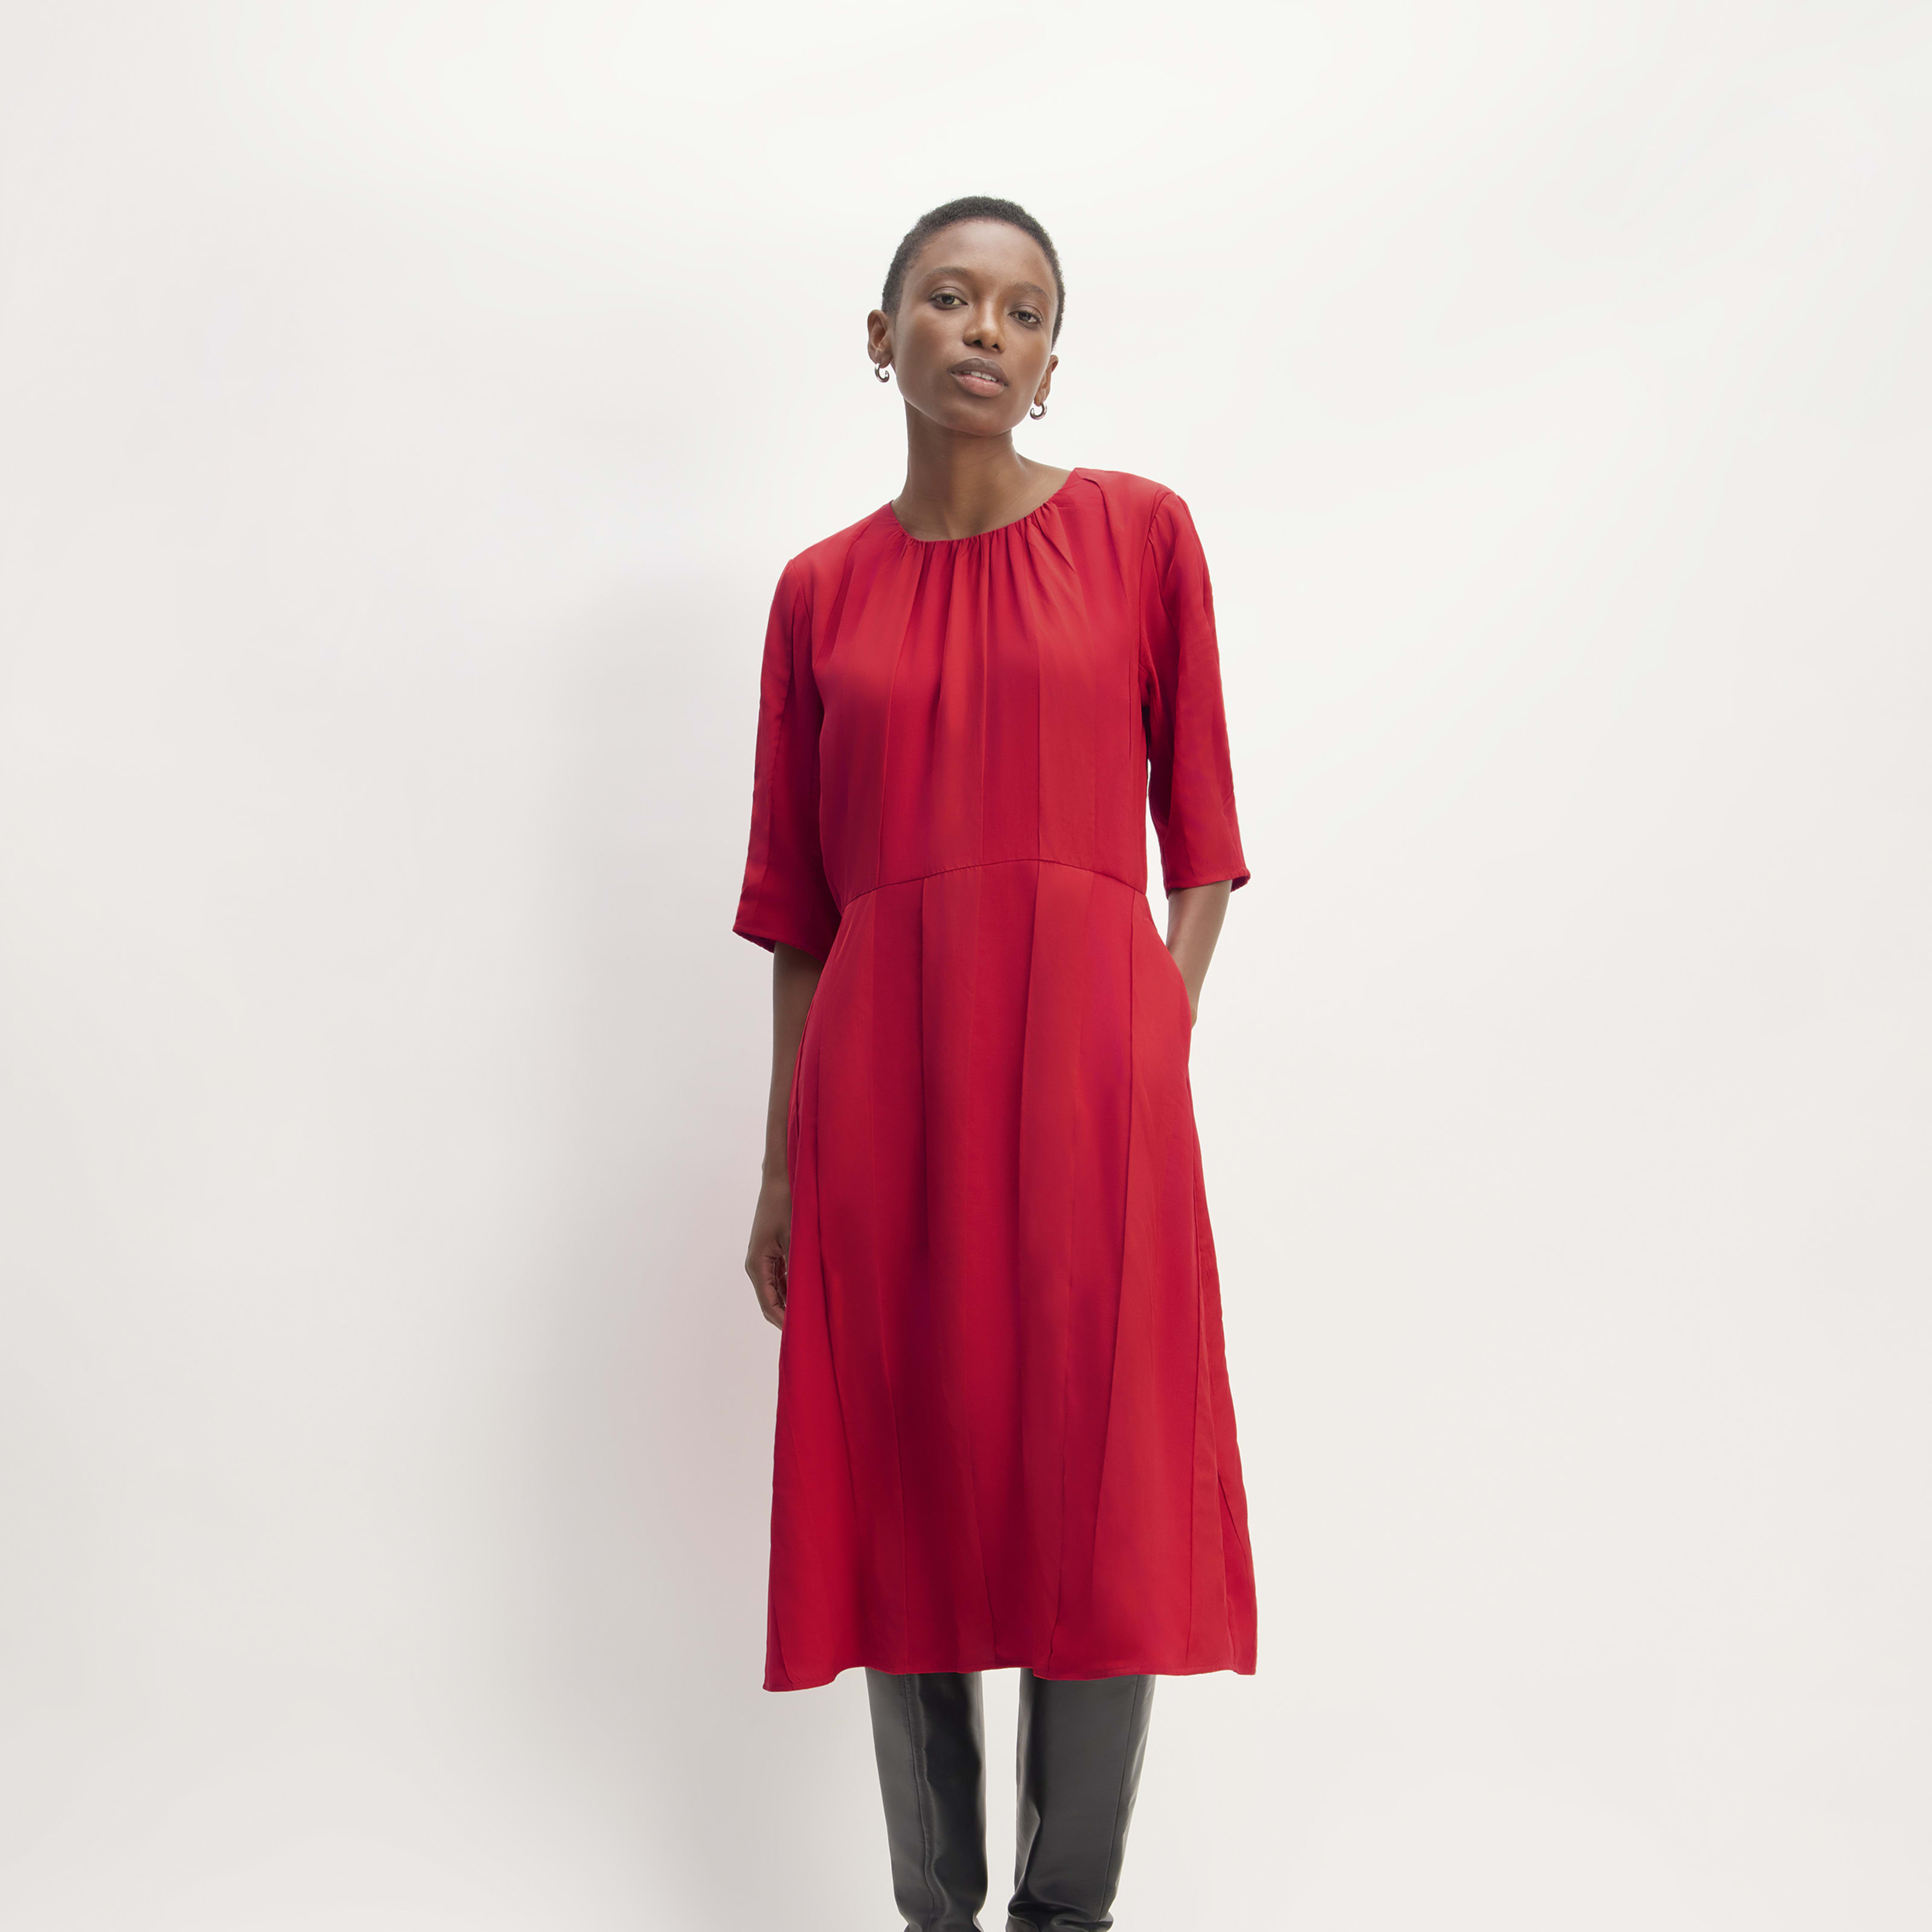 women's city stripe ruched dress by everlane in haute red, size 00